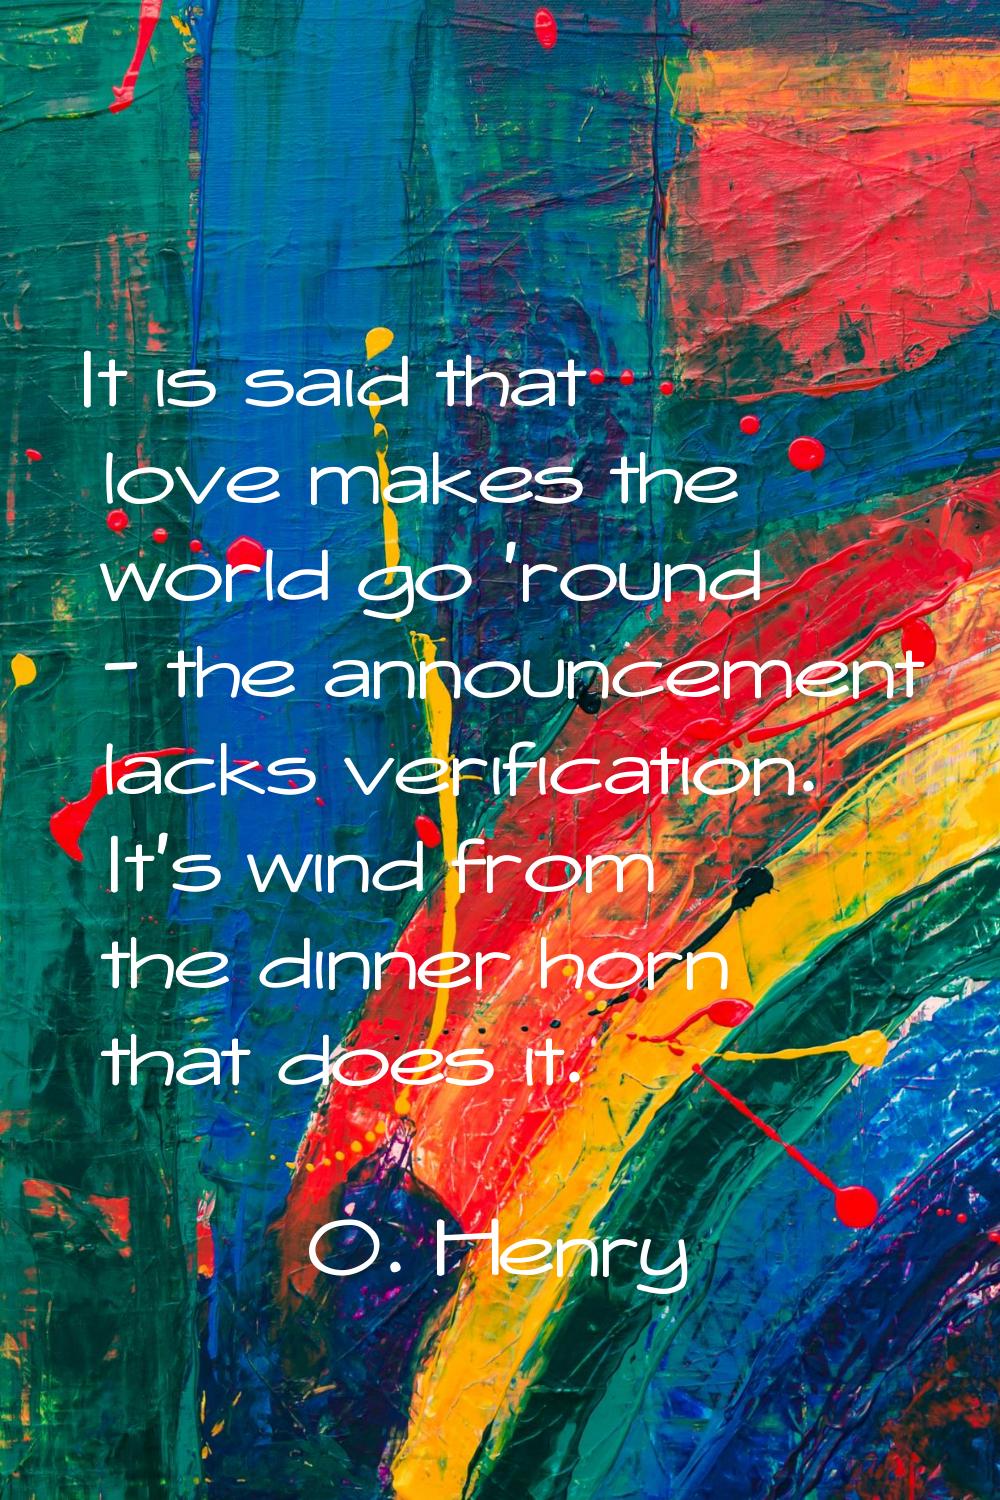 It is said that love makes the world go 'round - the announcement lacks verification. It's wind fro